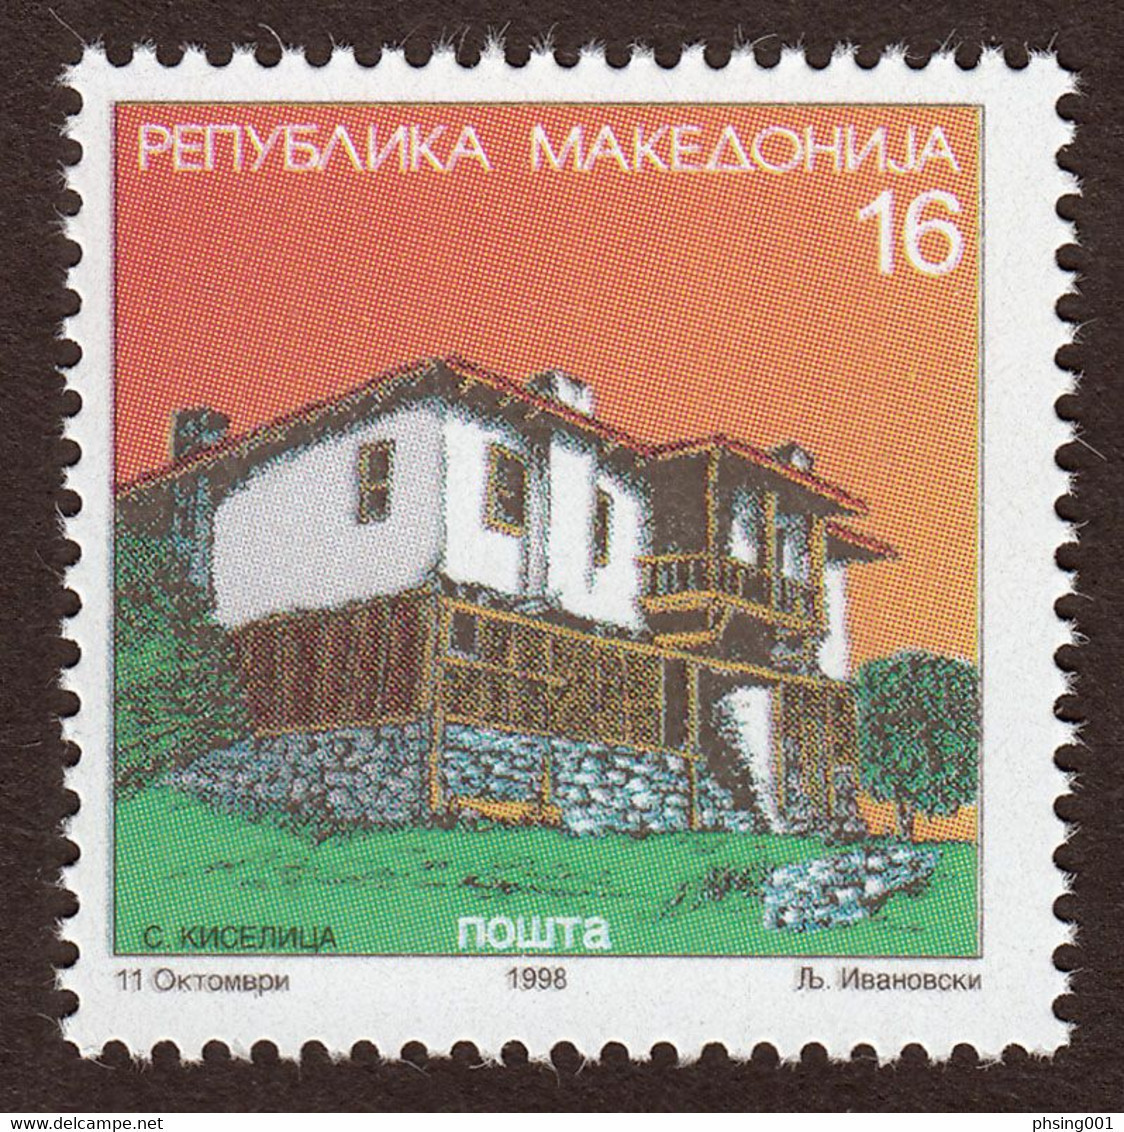 Macedonia 1998 Architecture Villages Houses Kiselica, Definitive Stamp MNH - North Macedonia